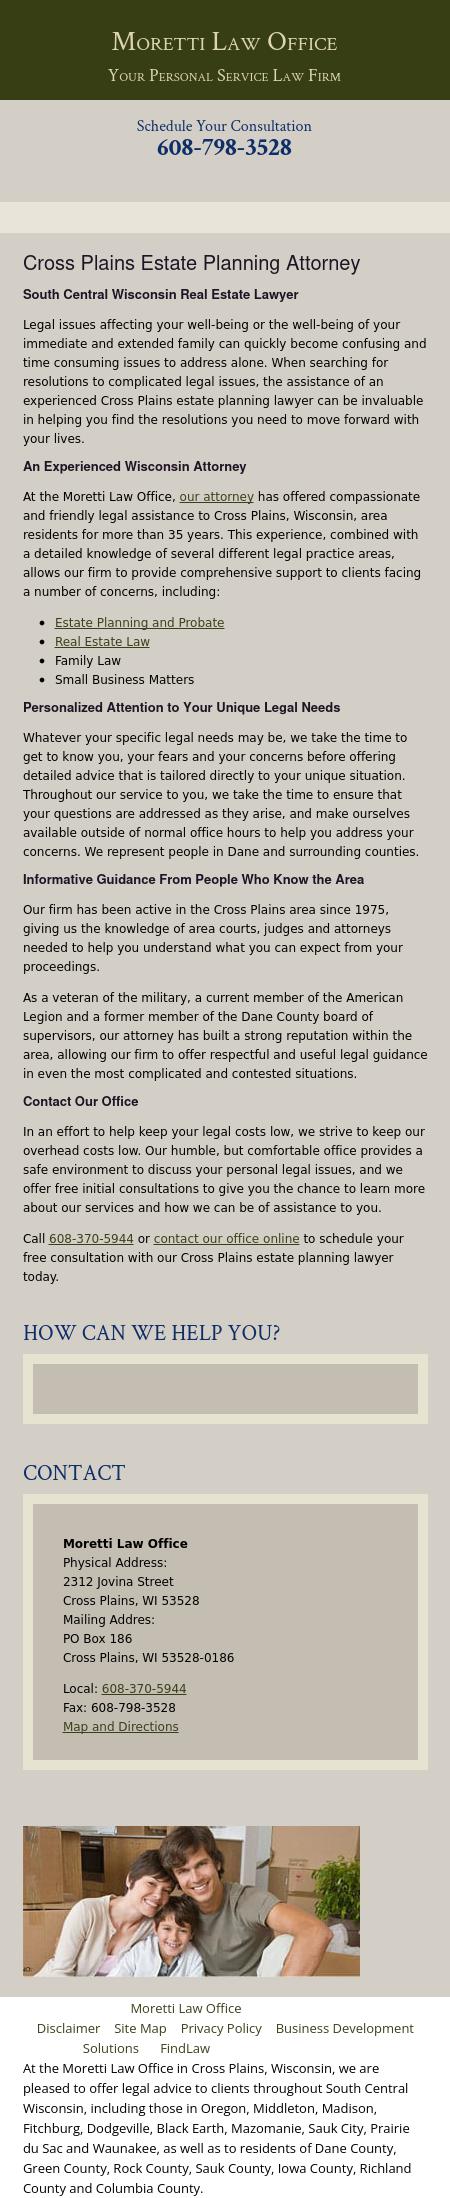 Moretti Law Office - Cross Plains WI Lawyers